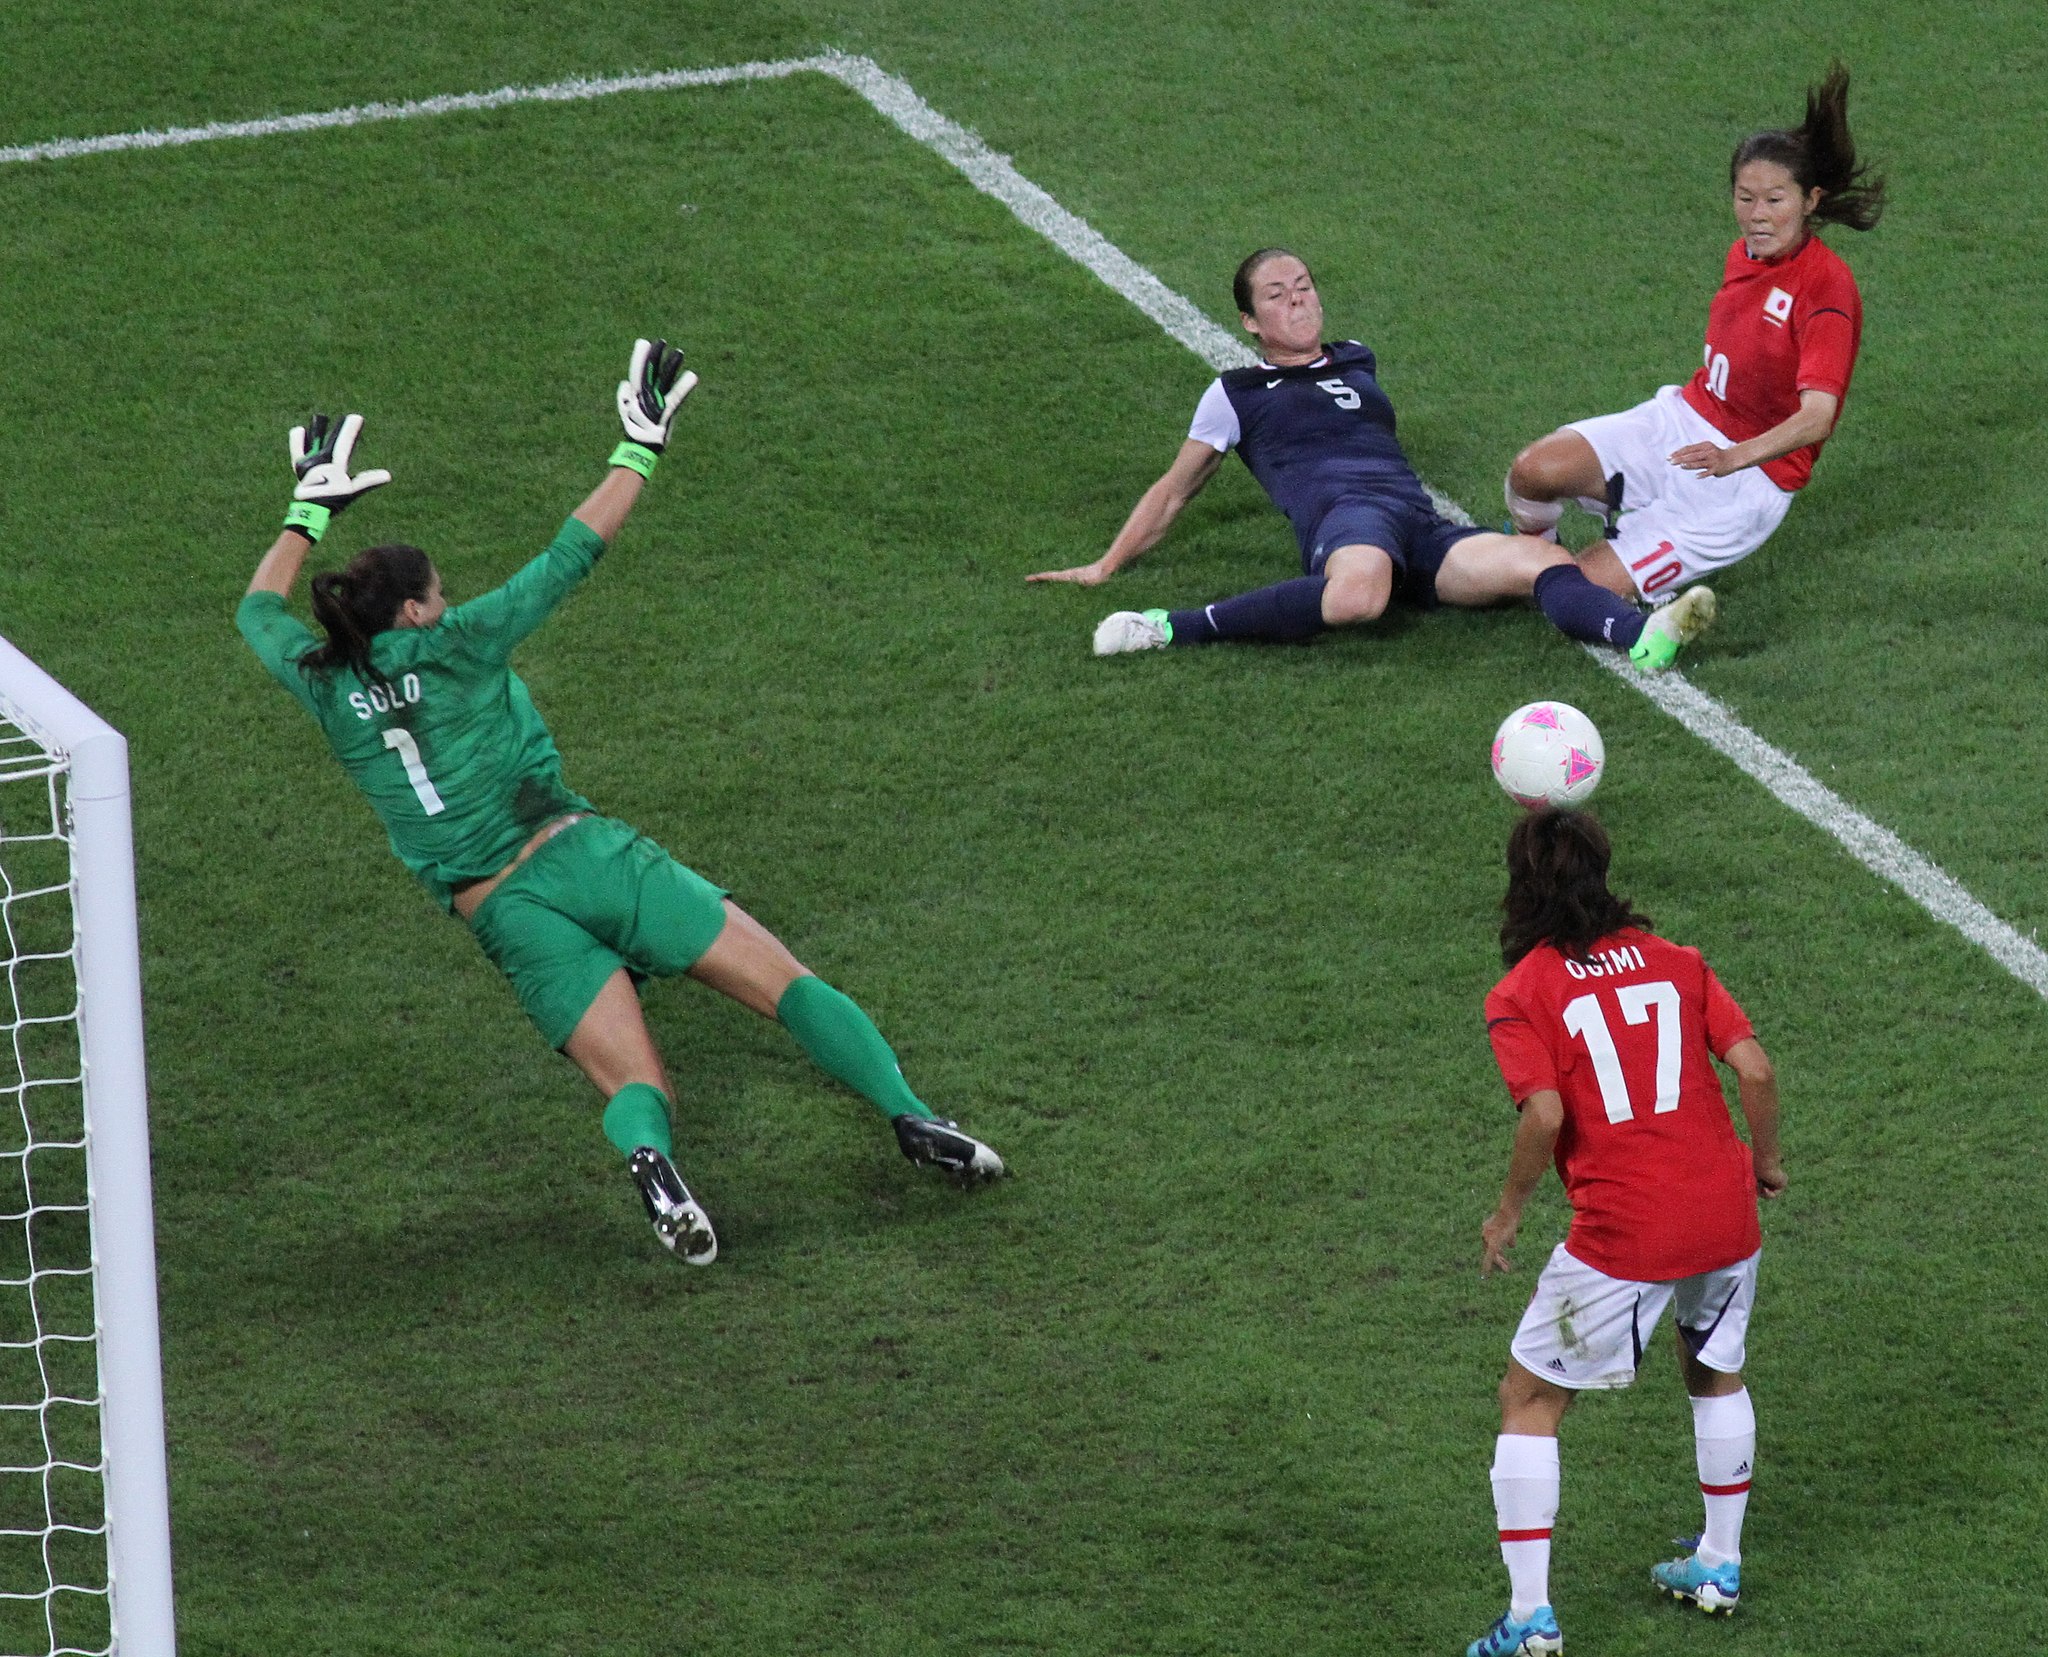 Yuki Ogimi scores a goal for Japan against the United States in the 2012 Olympic gold medal match for women's soccer.